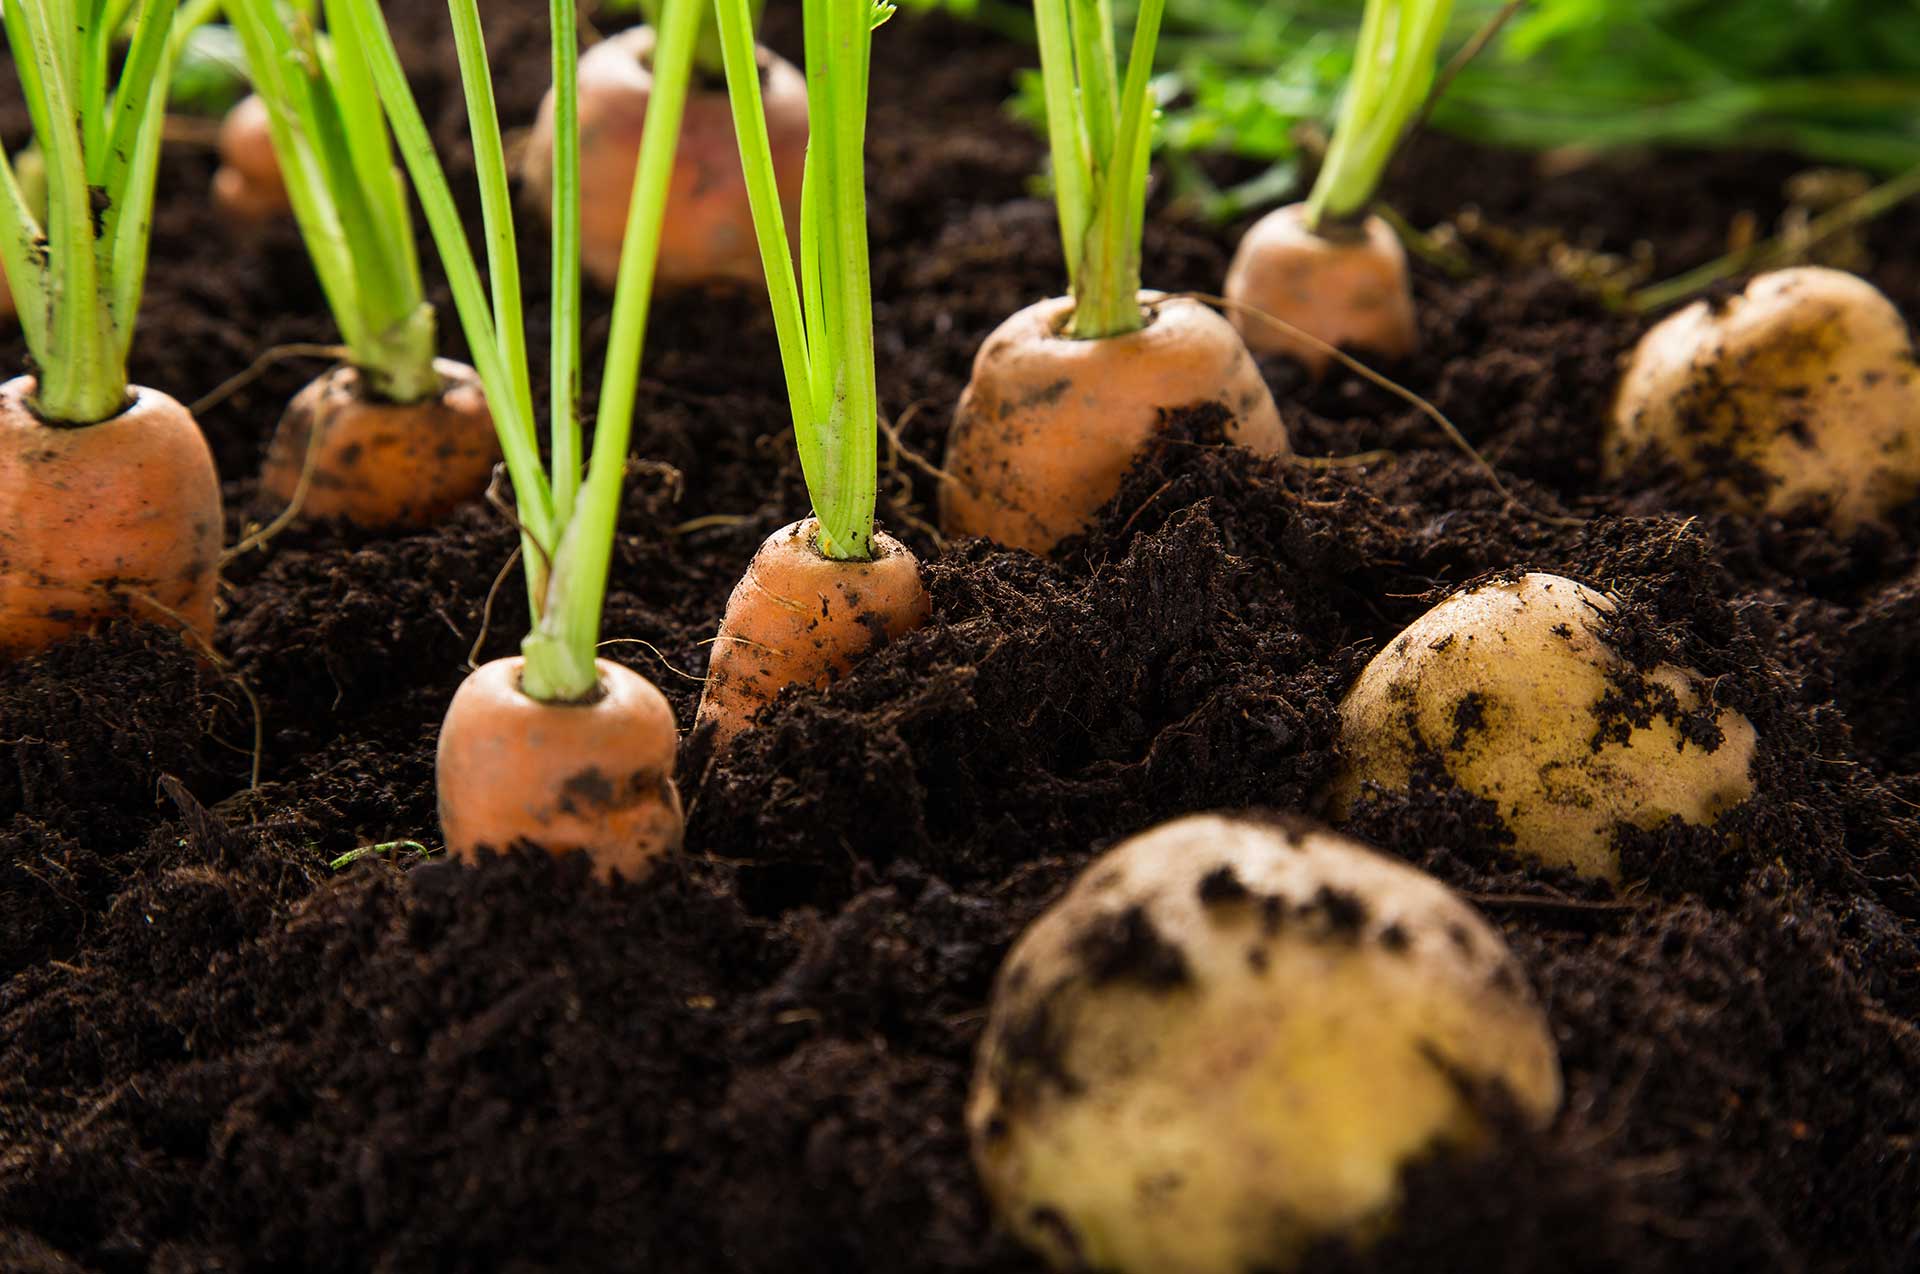 increased farm profit starts with healthy soil